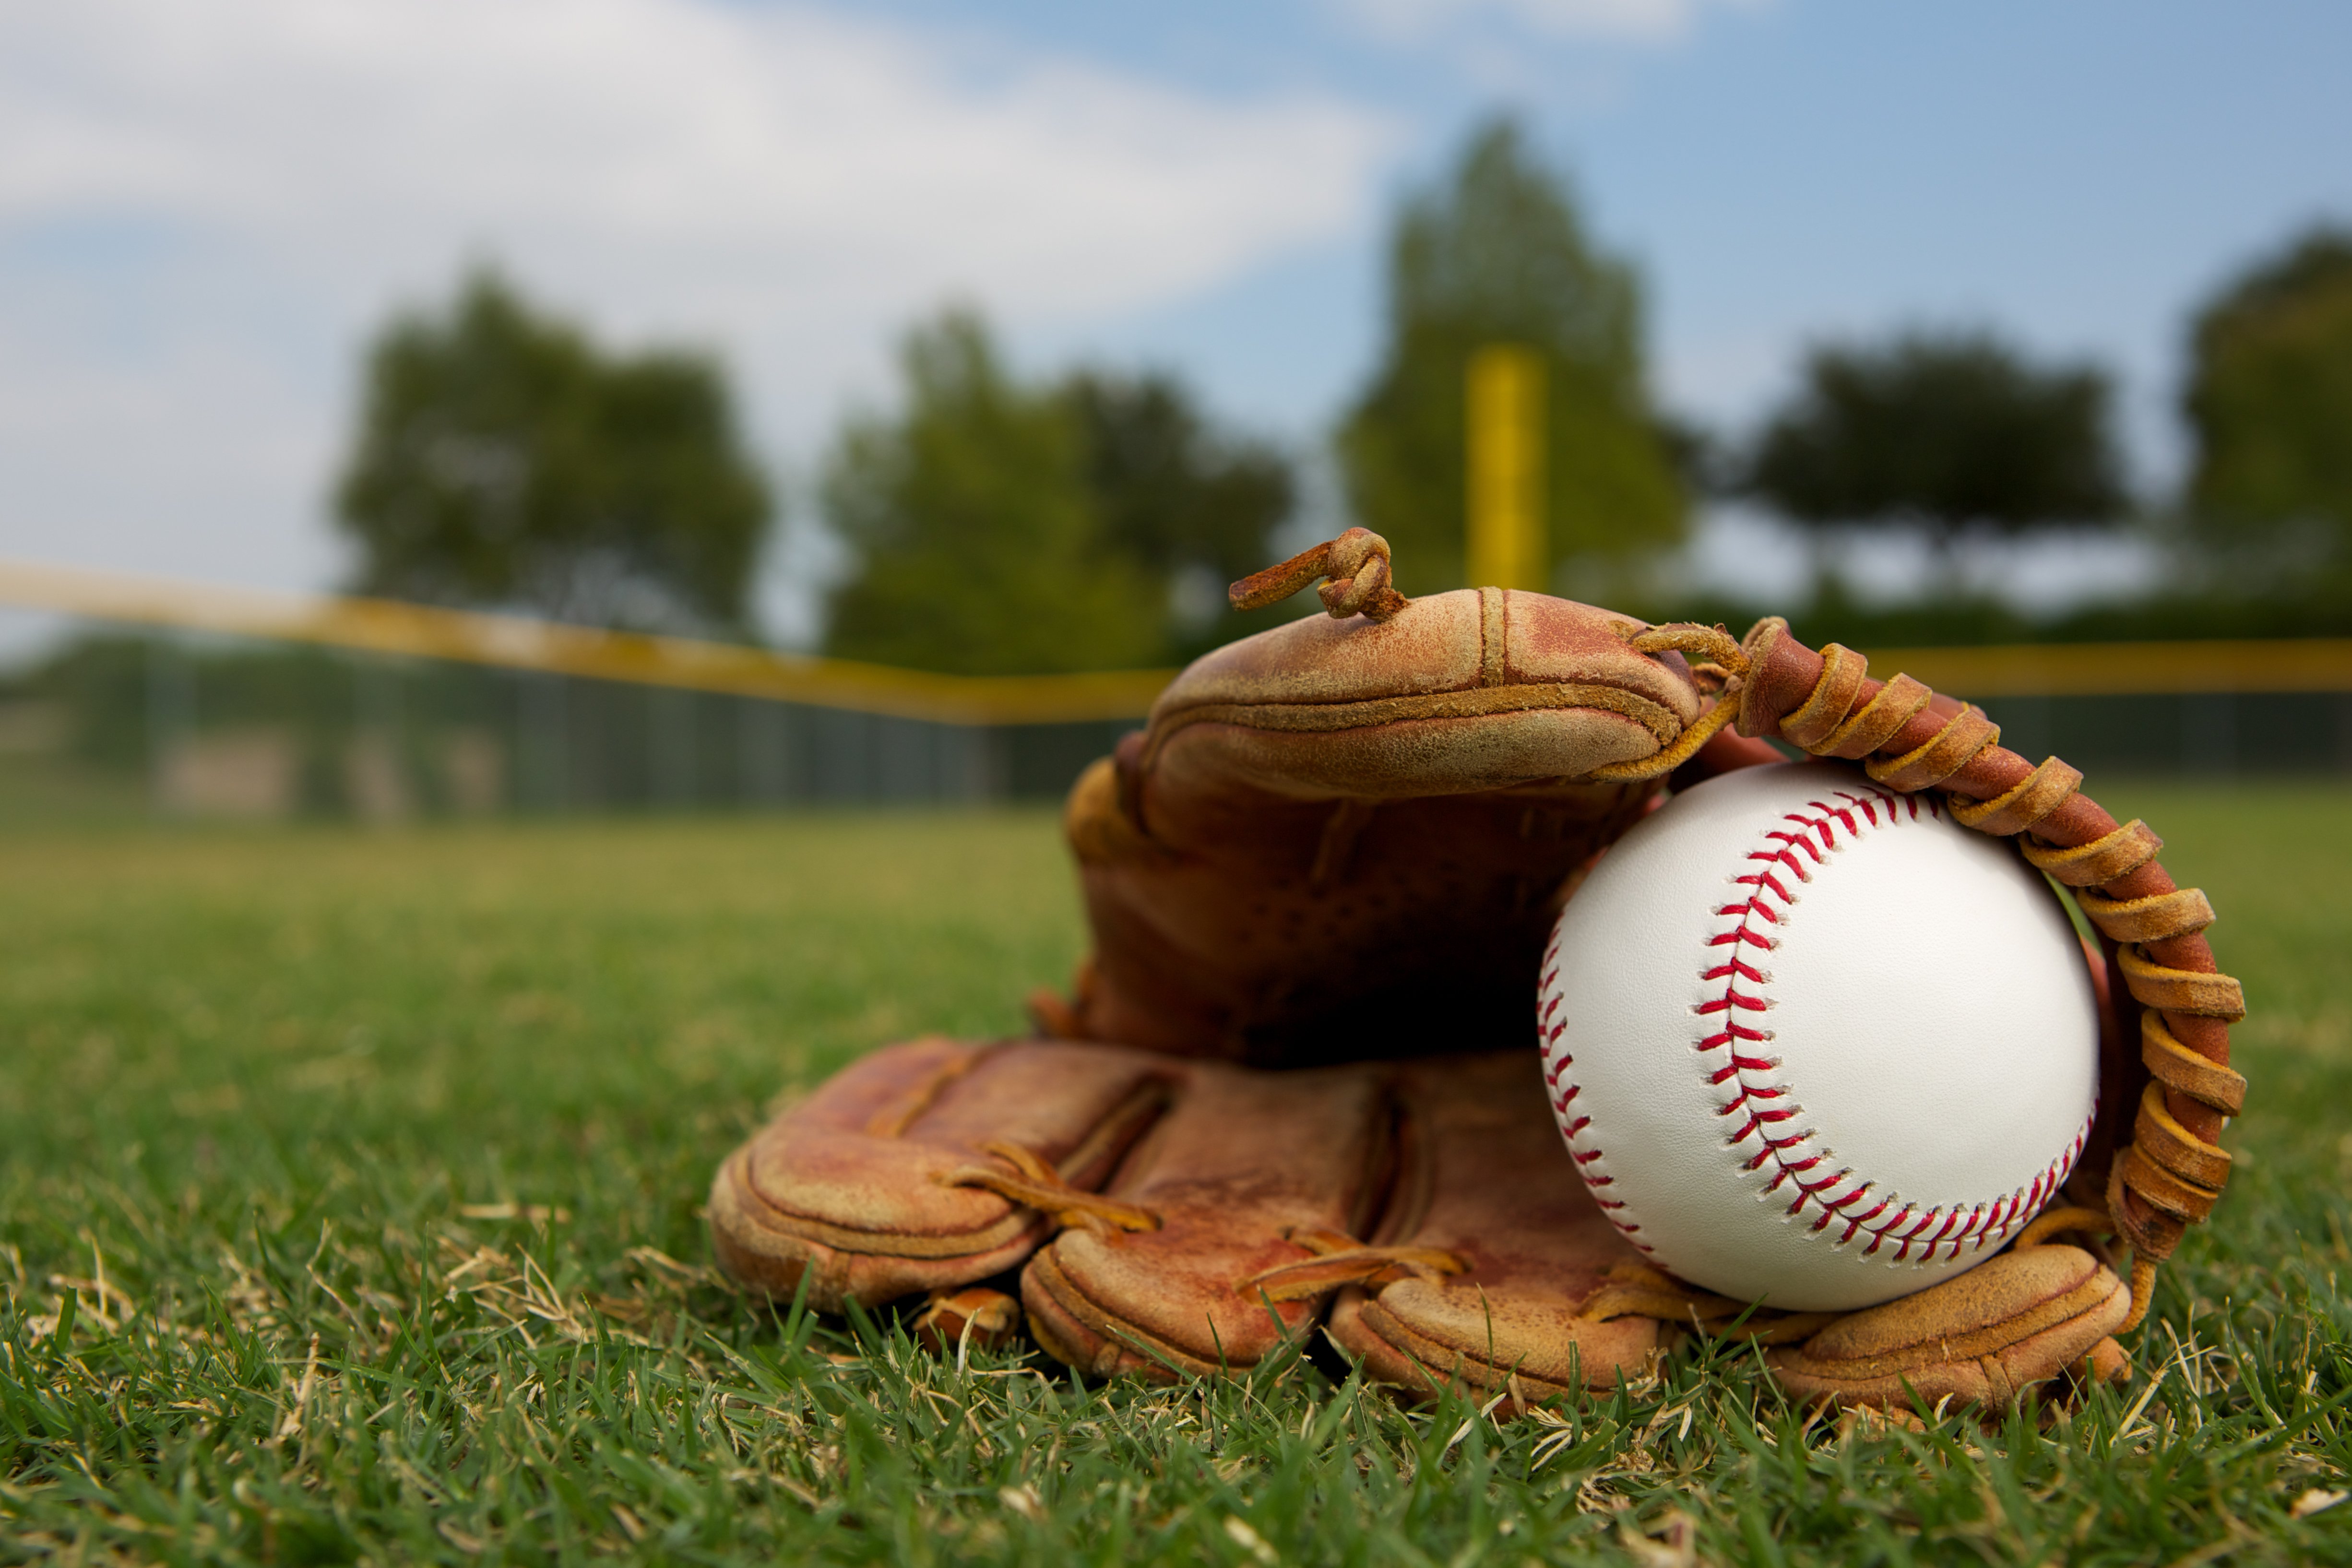 Baseball in a glove in the outfield | Photo: Shutterstock